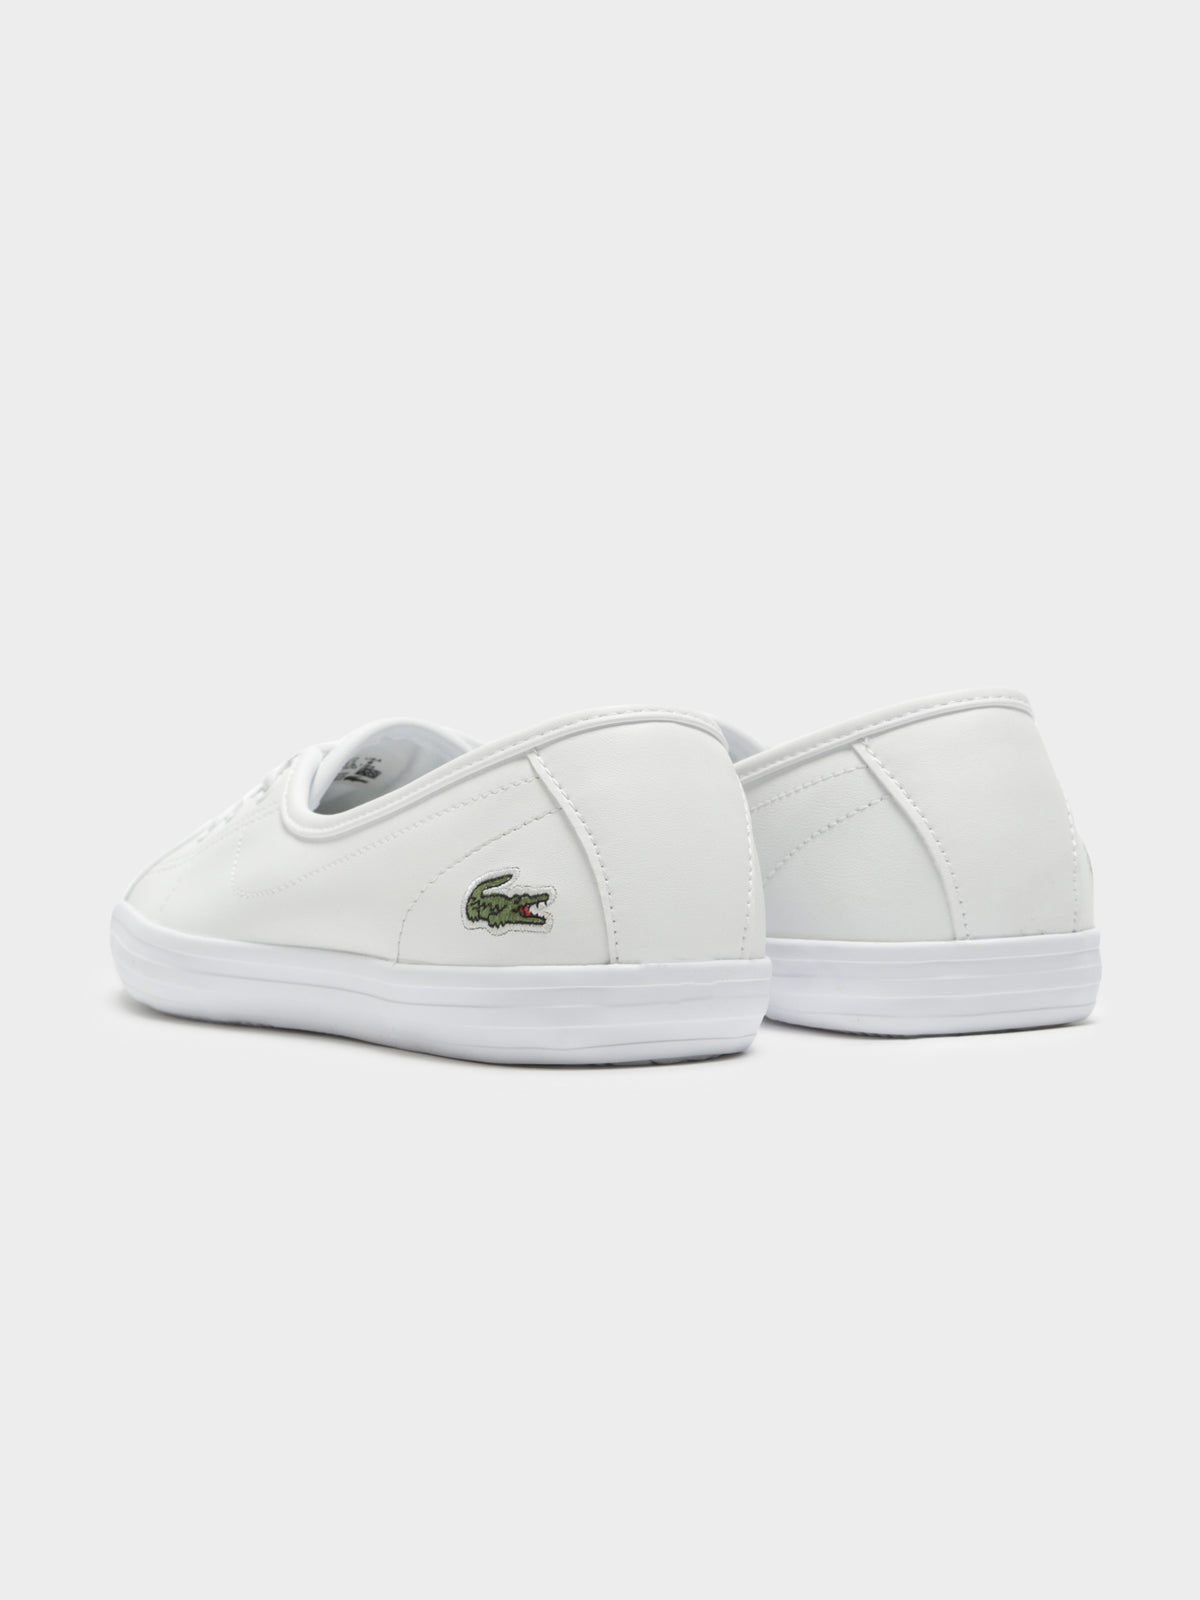 Womens Ziane Chunky Sneakers in White